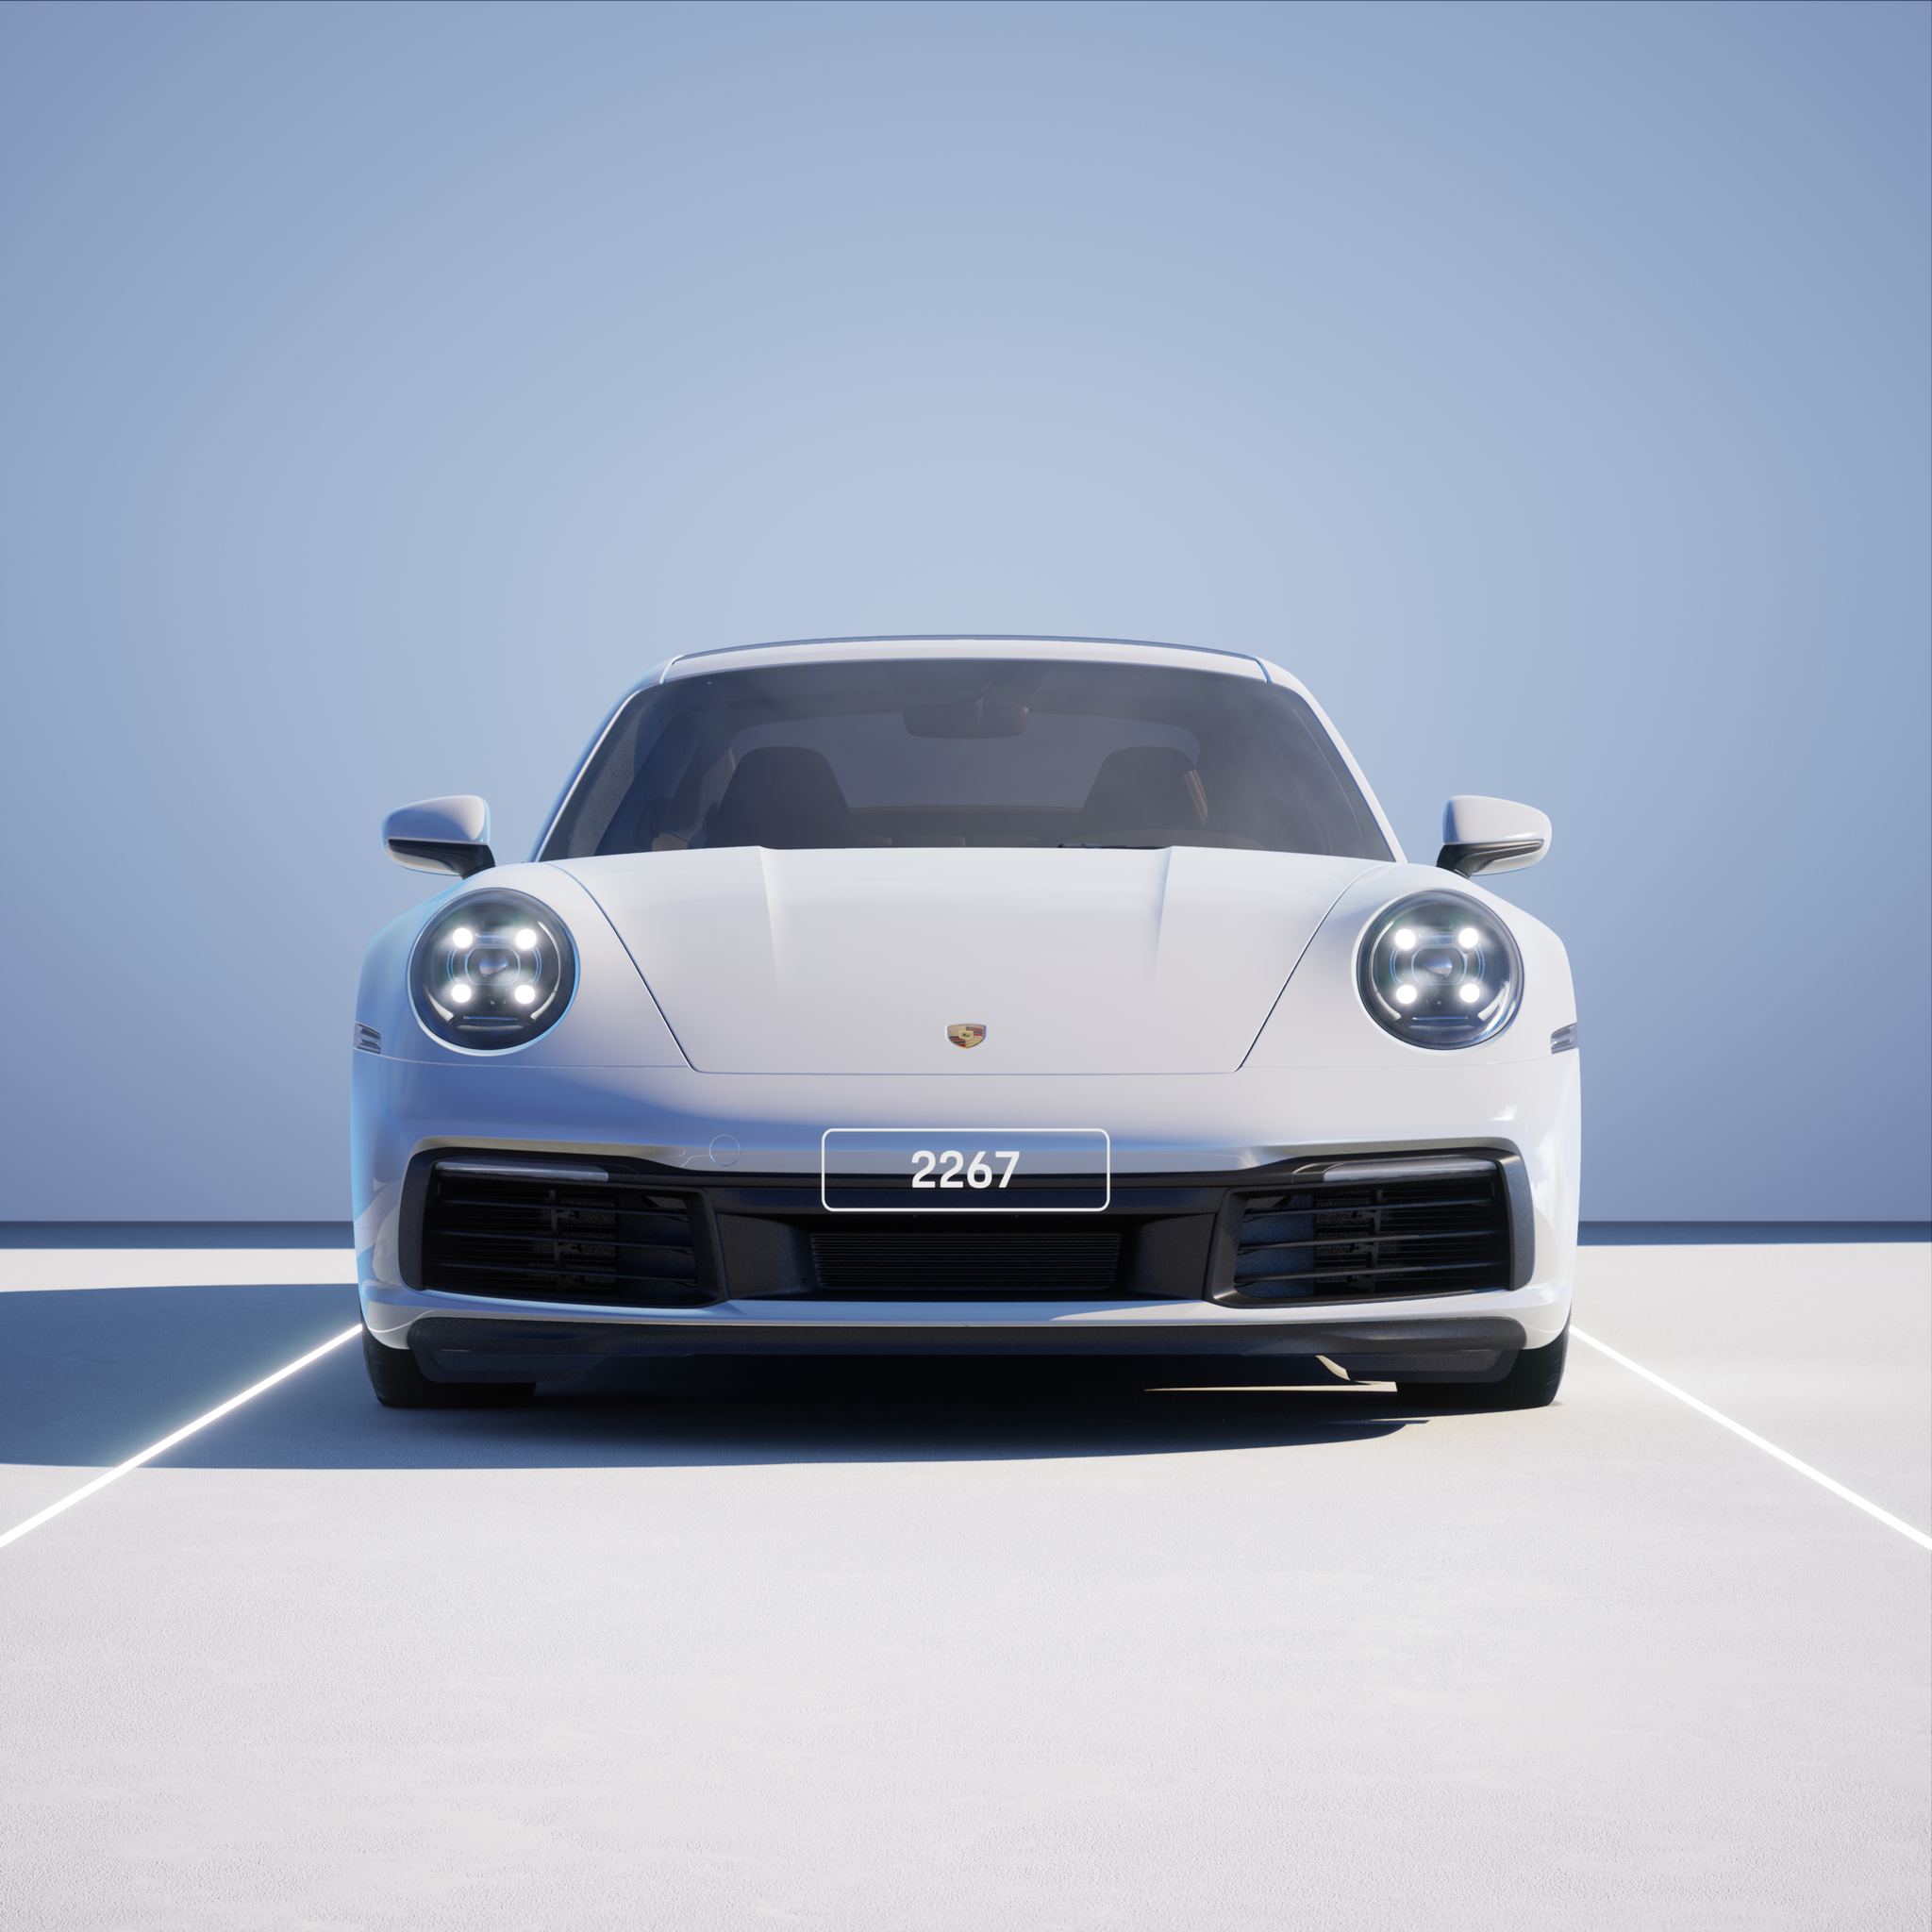 The PORSCHΞ 911 2267 image in phase